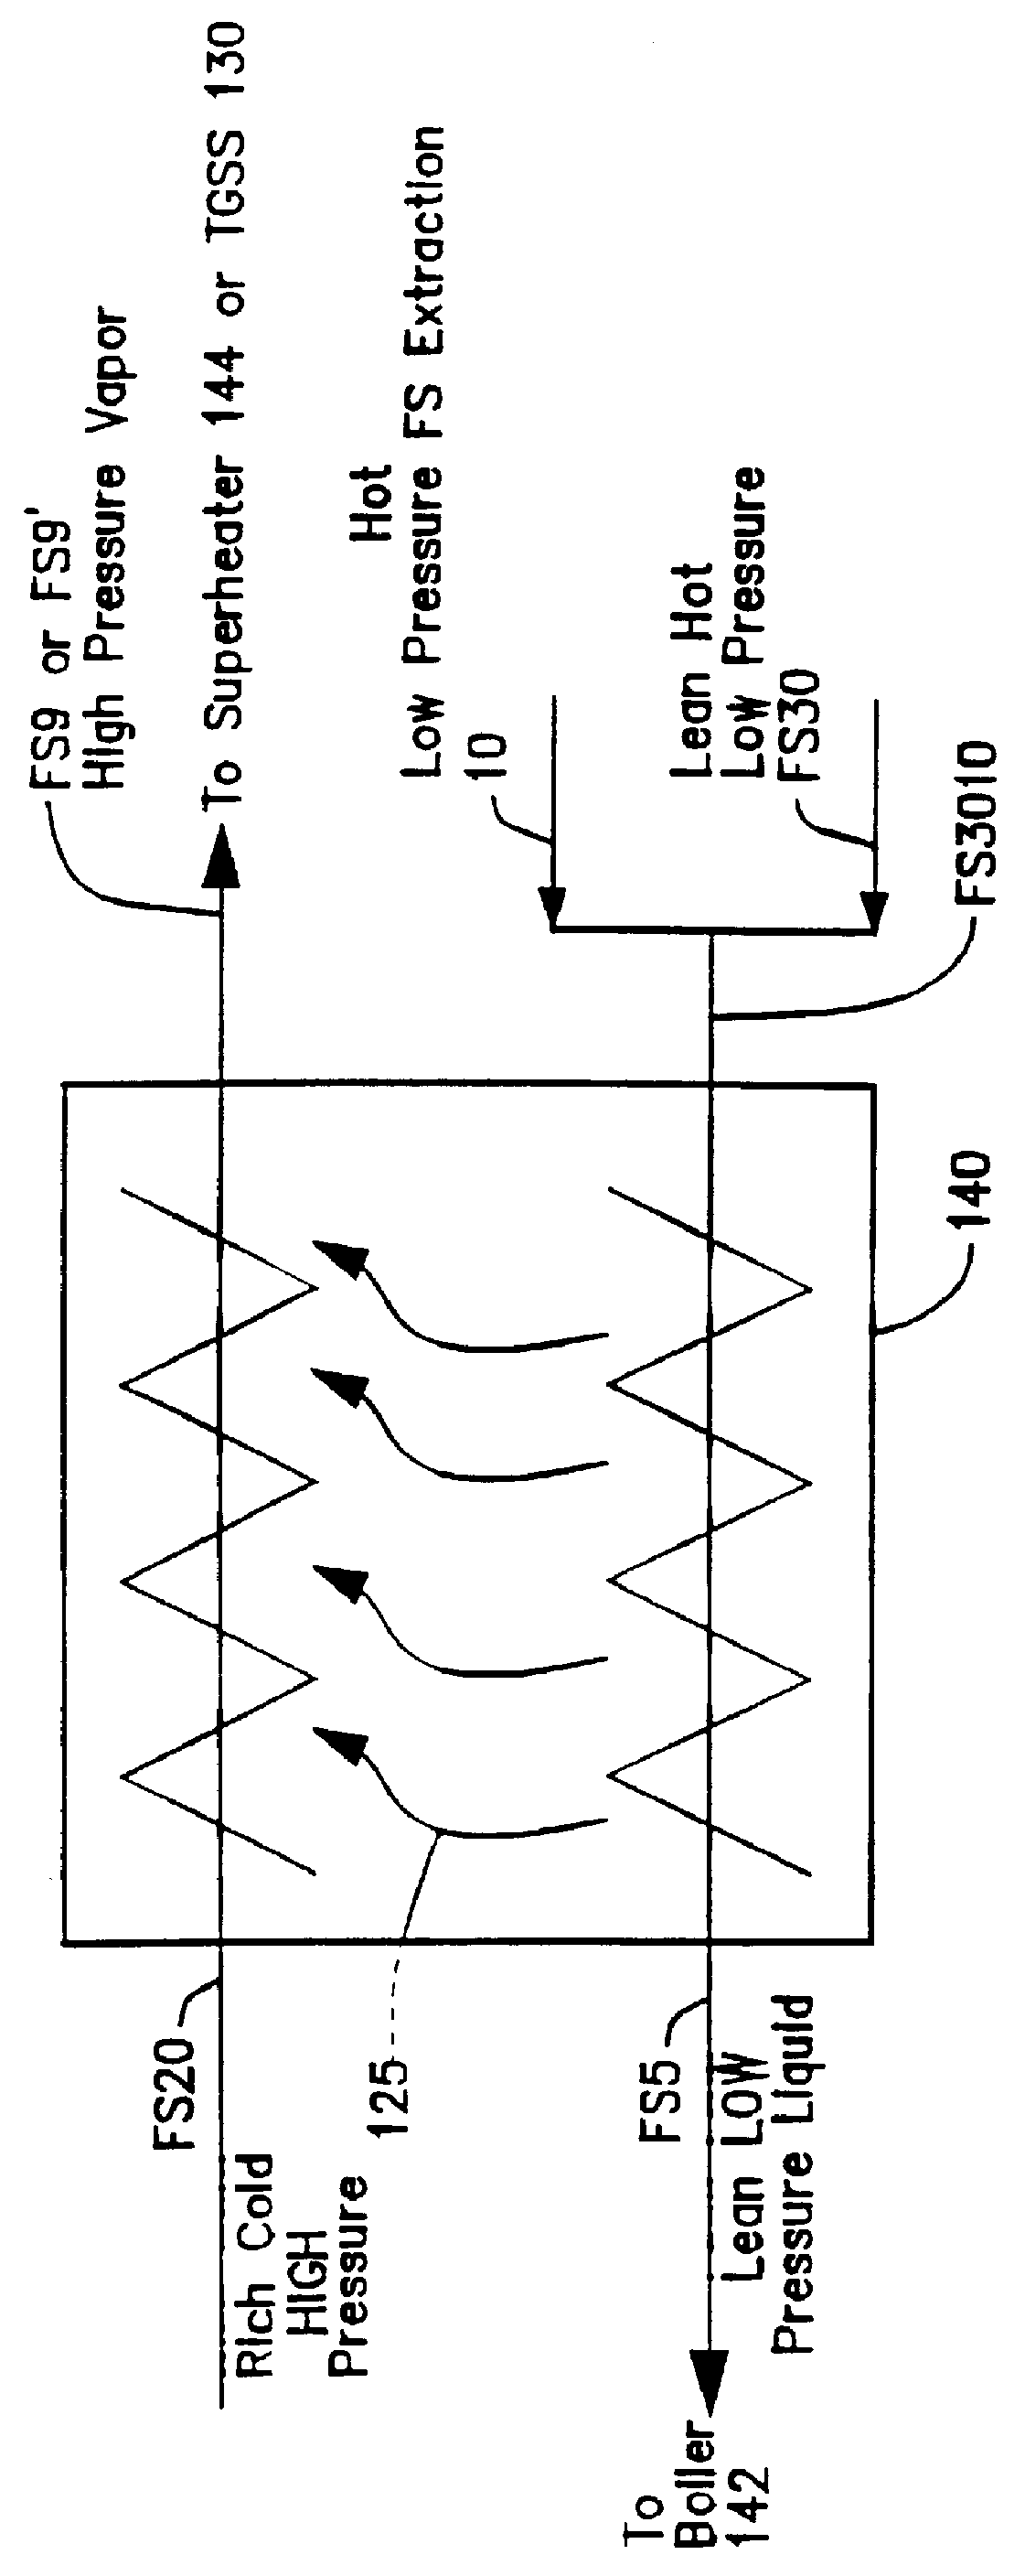 Technique for controlling regenerative system condensation level due to changing conditions in a Kalina cycle power generation system